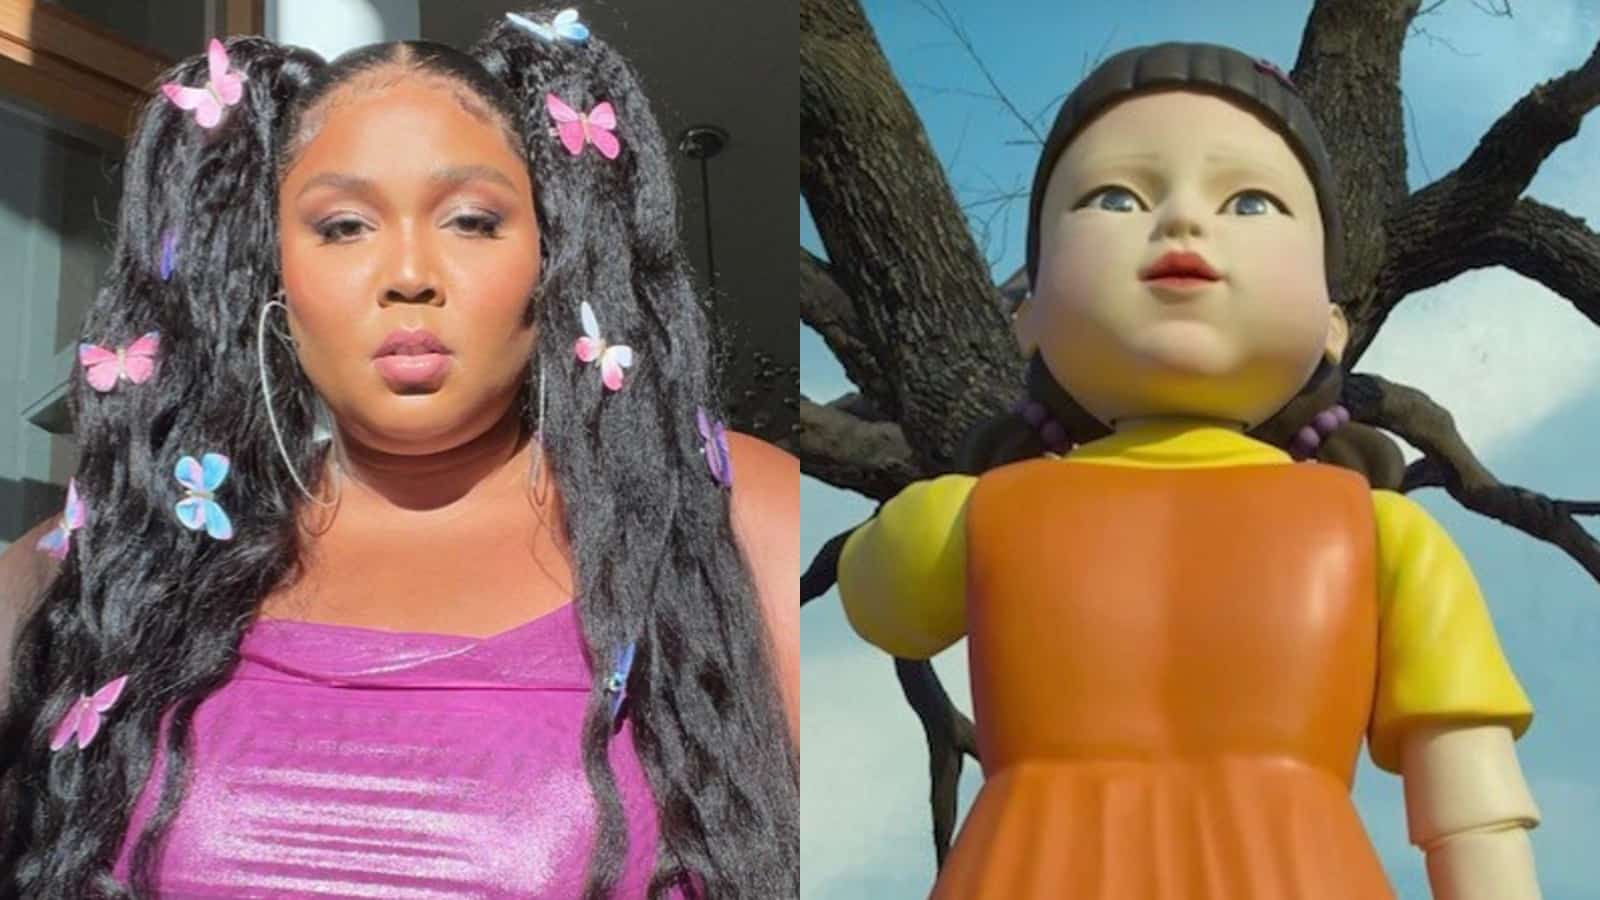 Lizzo next to the doll from Squid Game